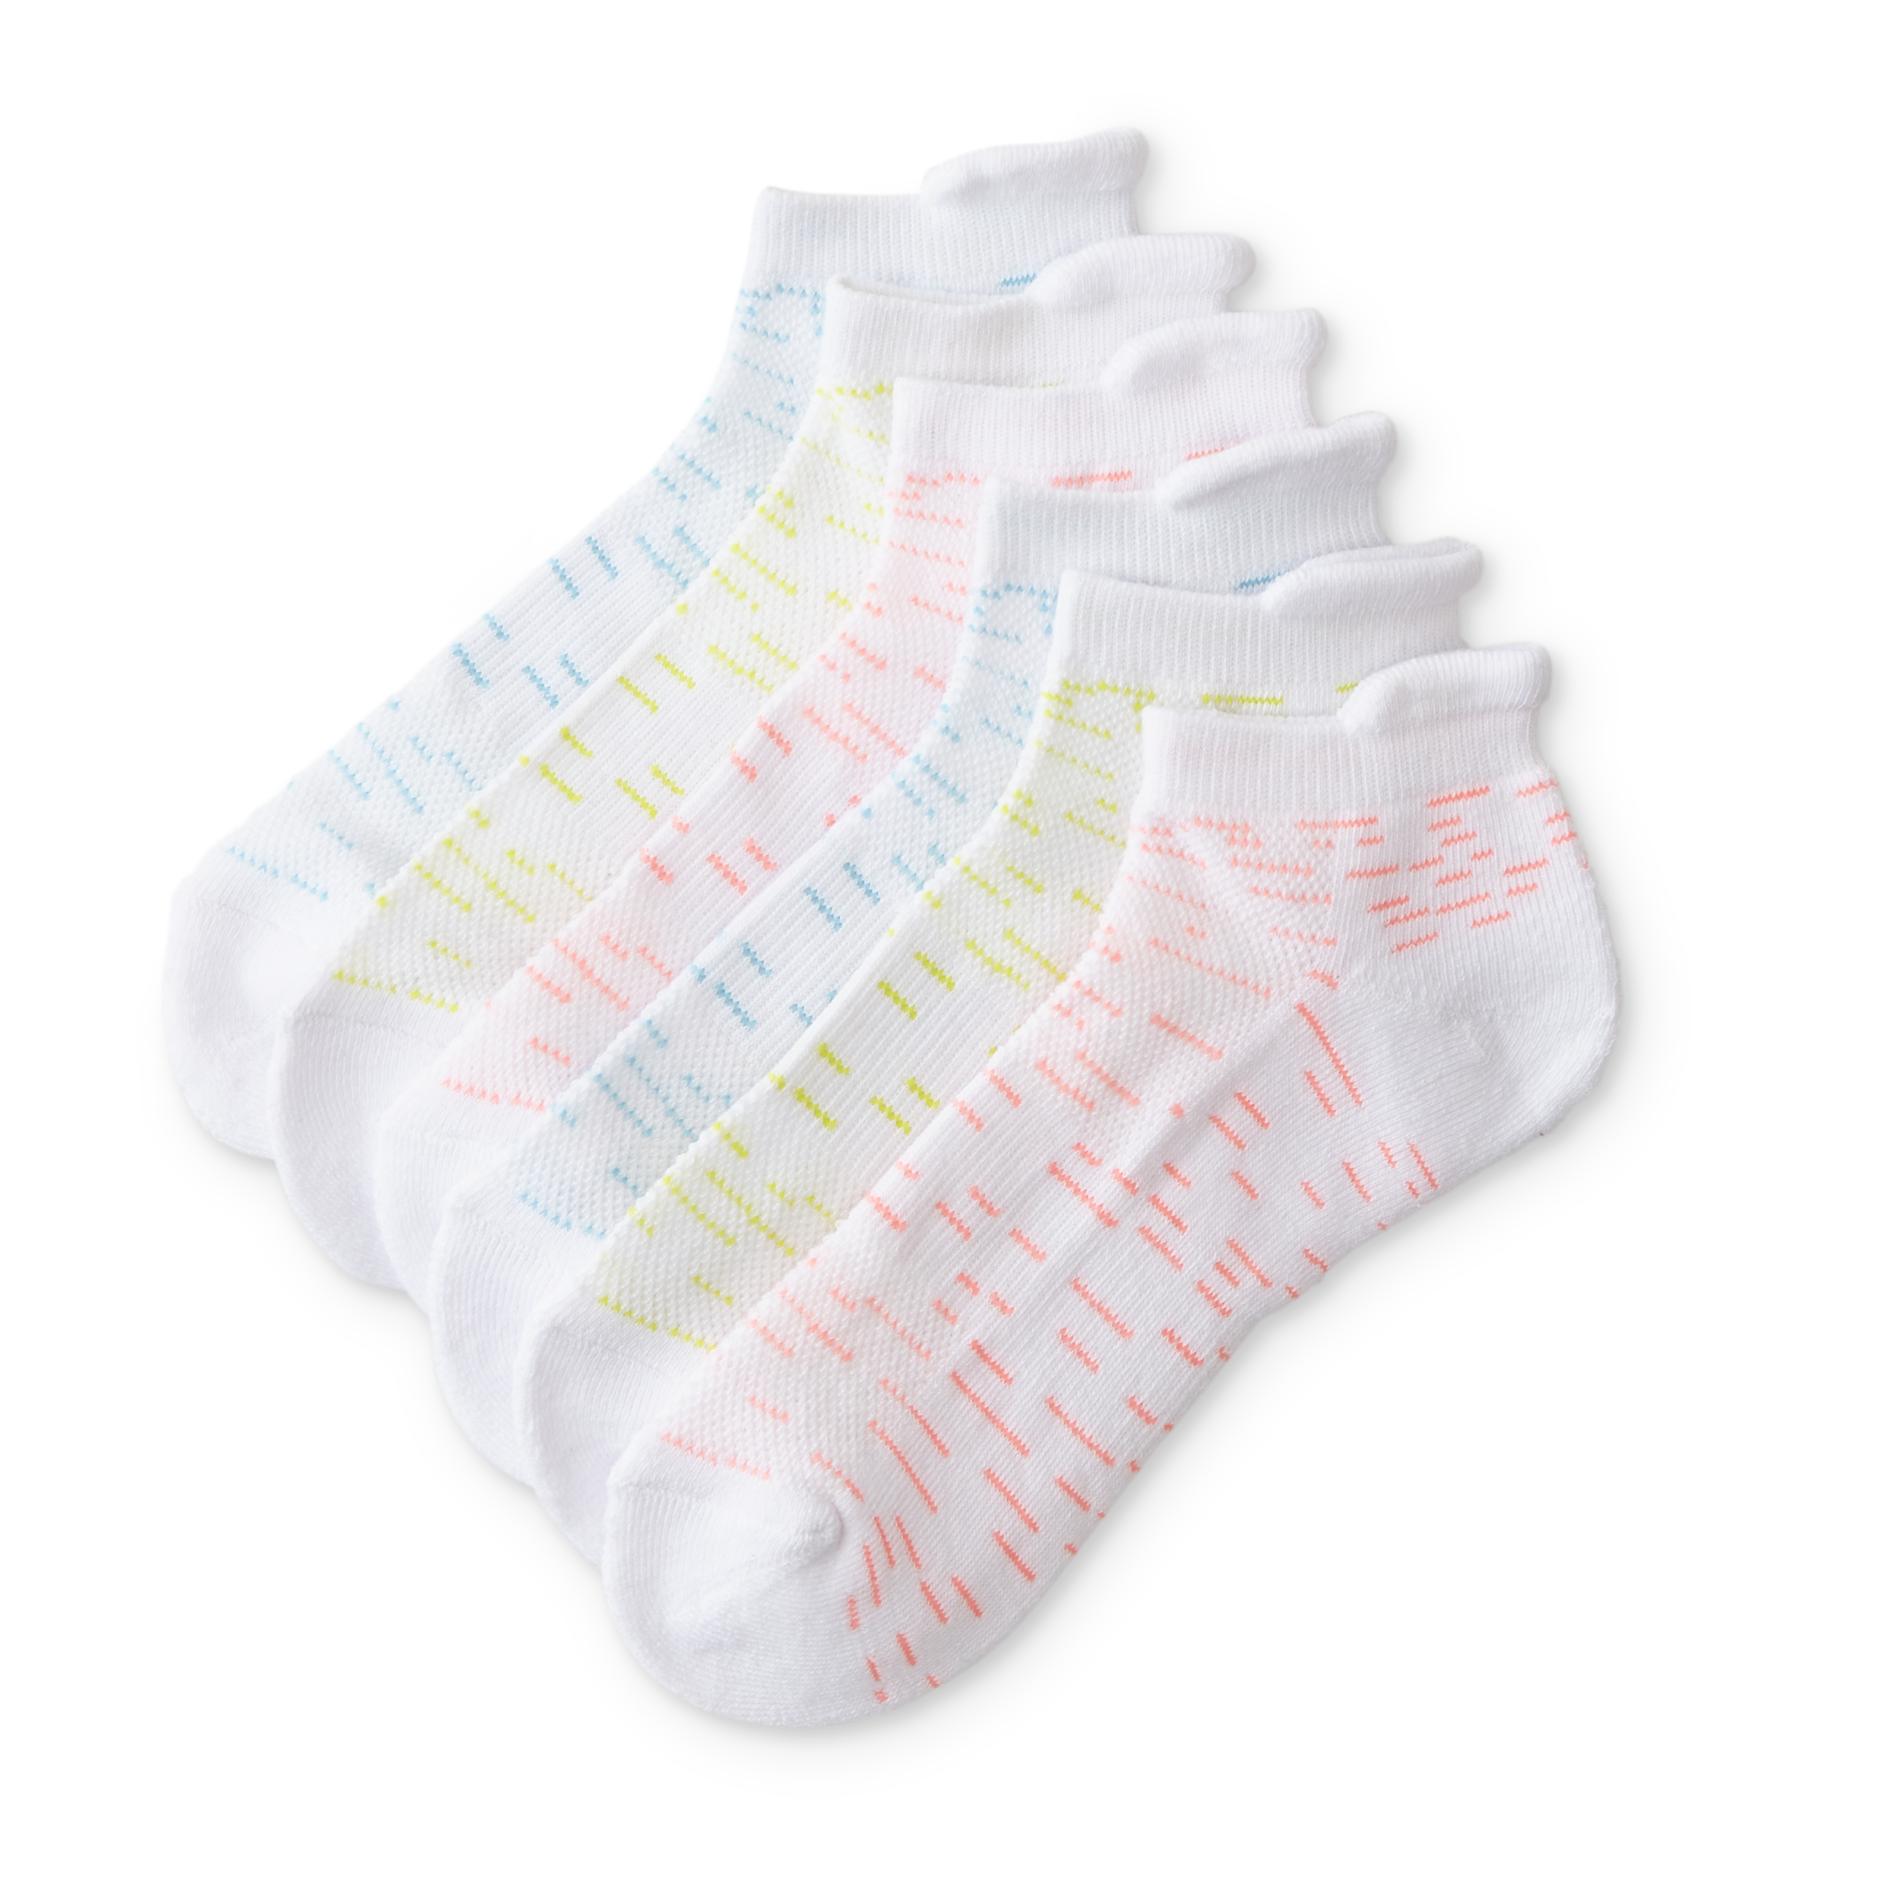 Athletech Women's 6-Pairs AT MAX Low-Cut Athletic Socks